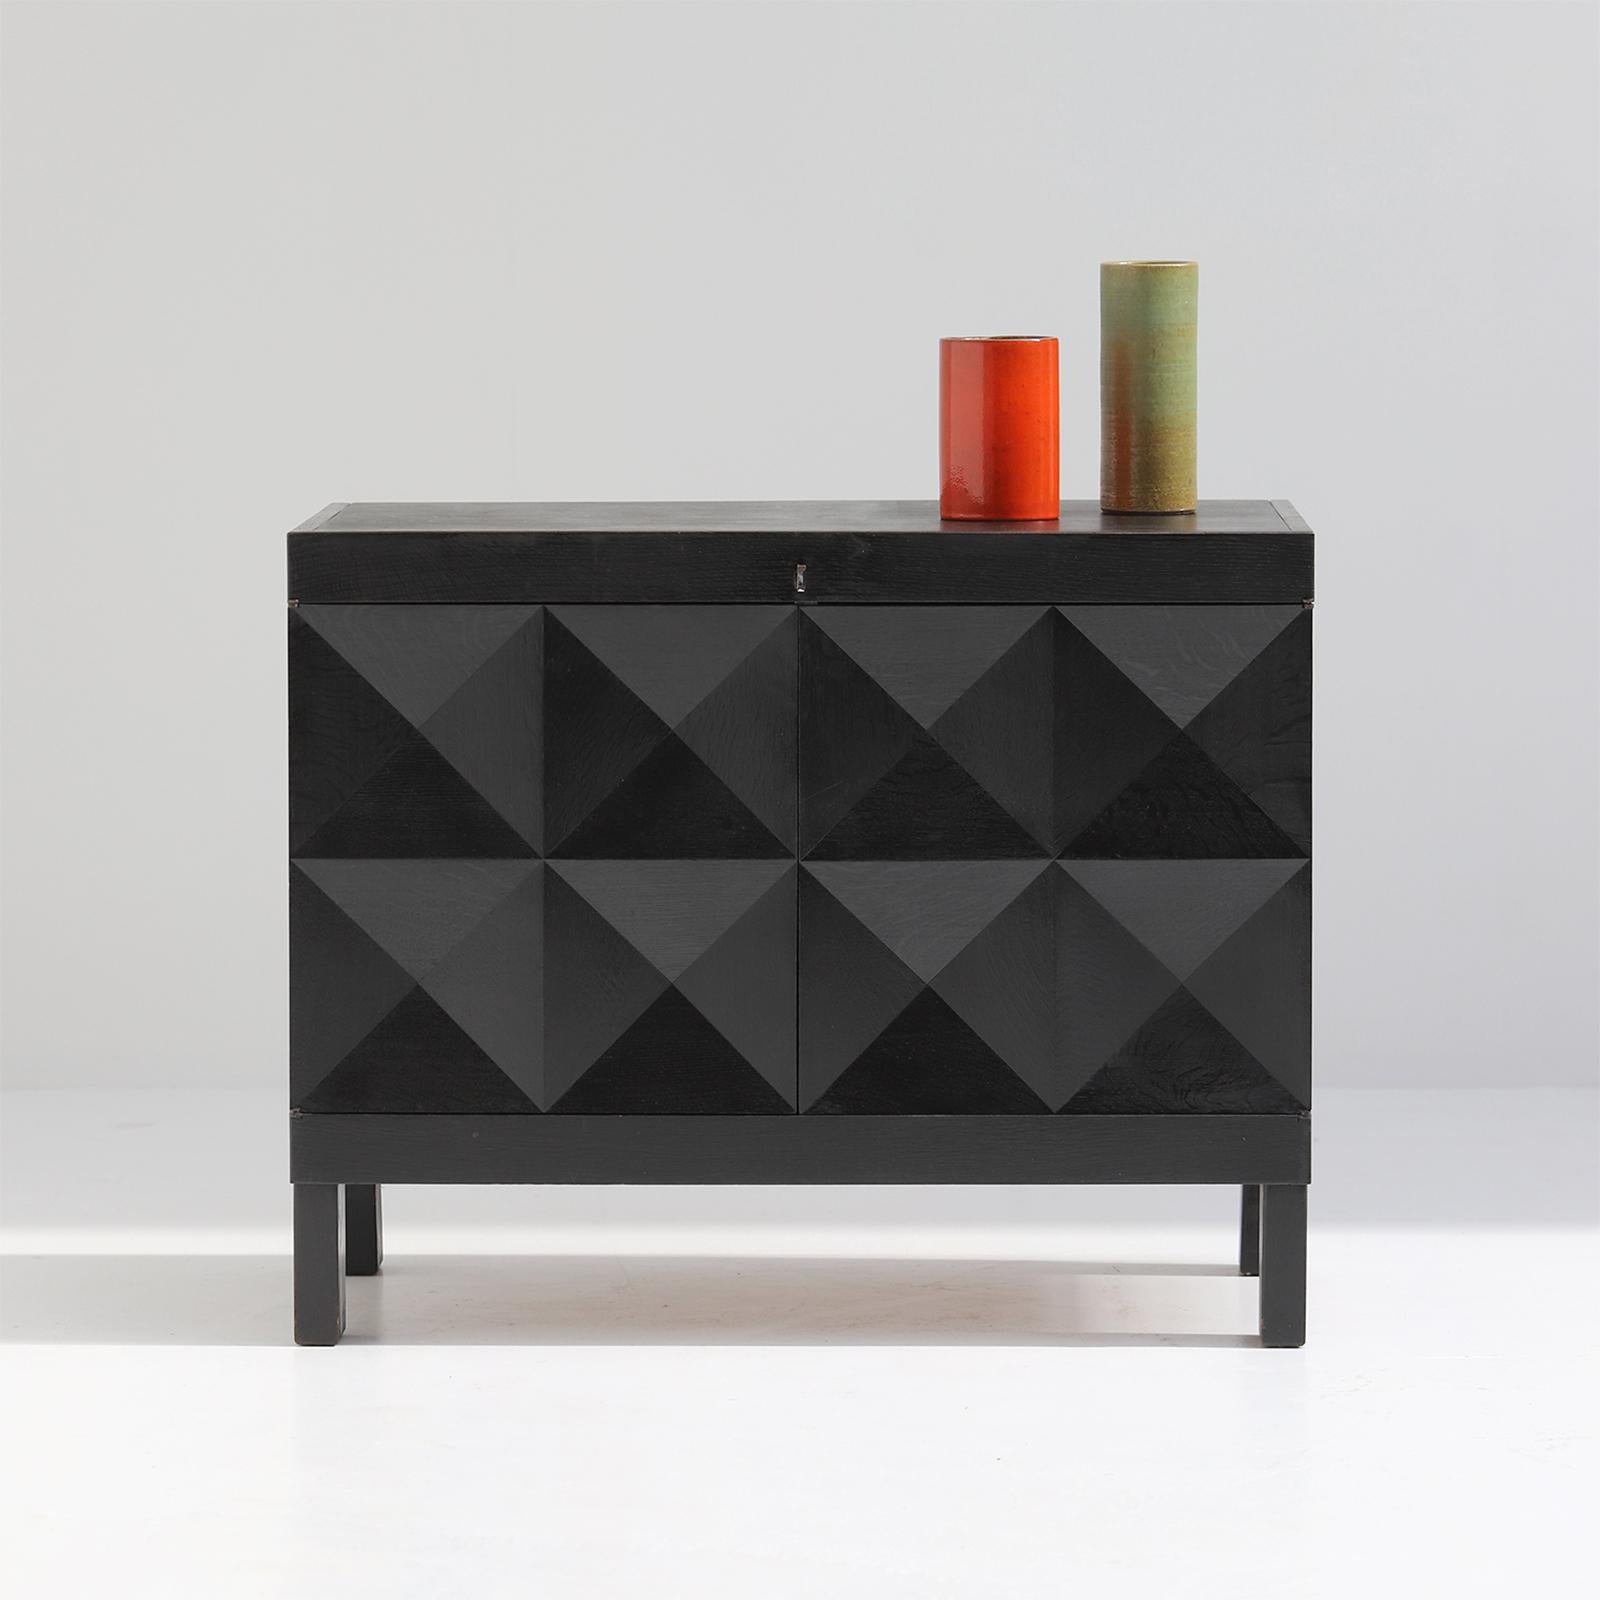 Beautiful and quality crafted cabinet with op-art doors designed by J. Batenburg for MI, Belgium 1969. These quality Belgian made furniture were definitely built during the late 60s and early 70s. Some dealers do sell this as a product from De